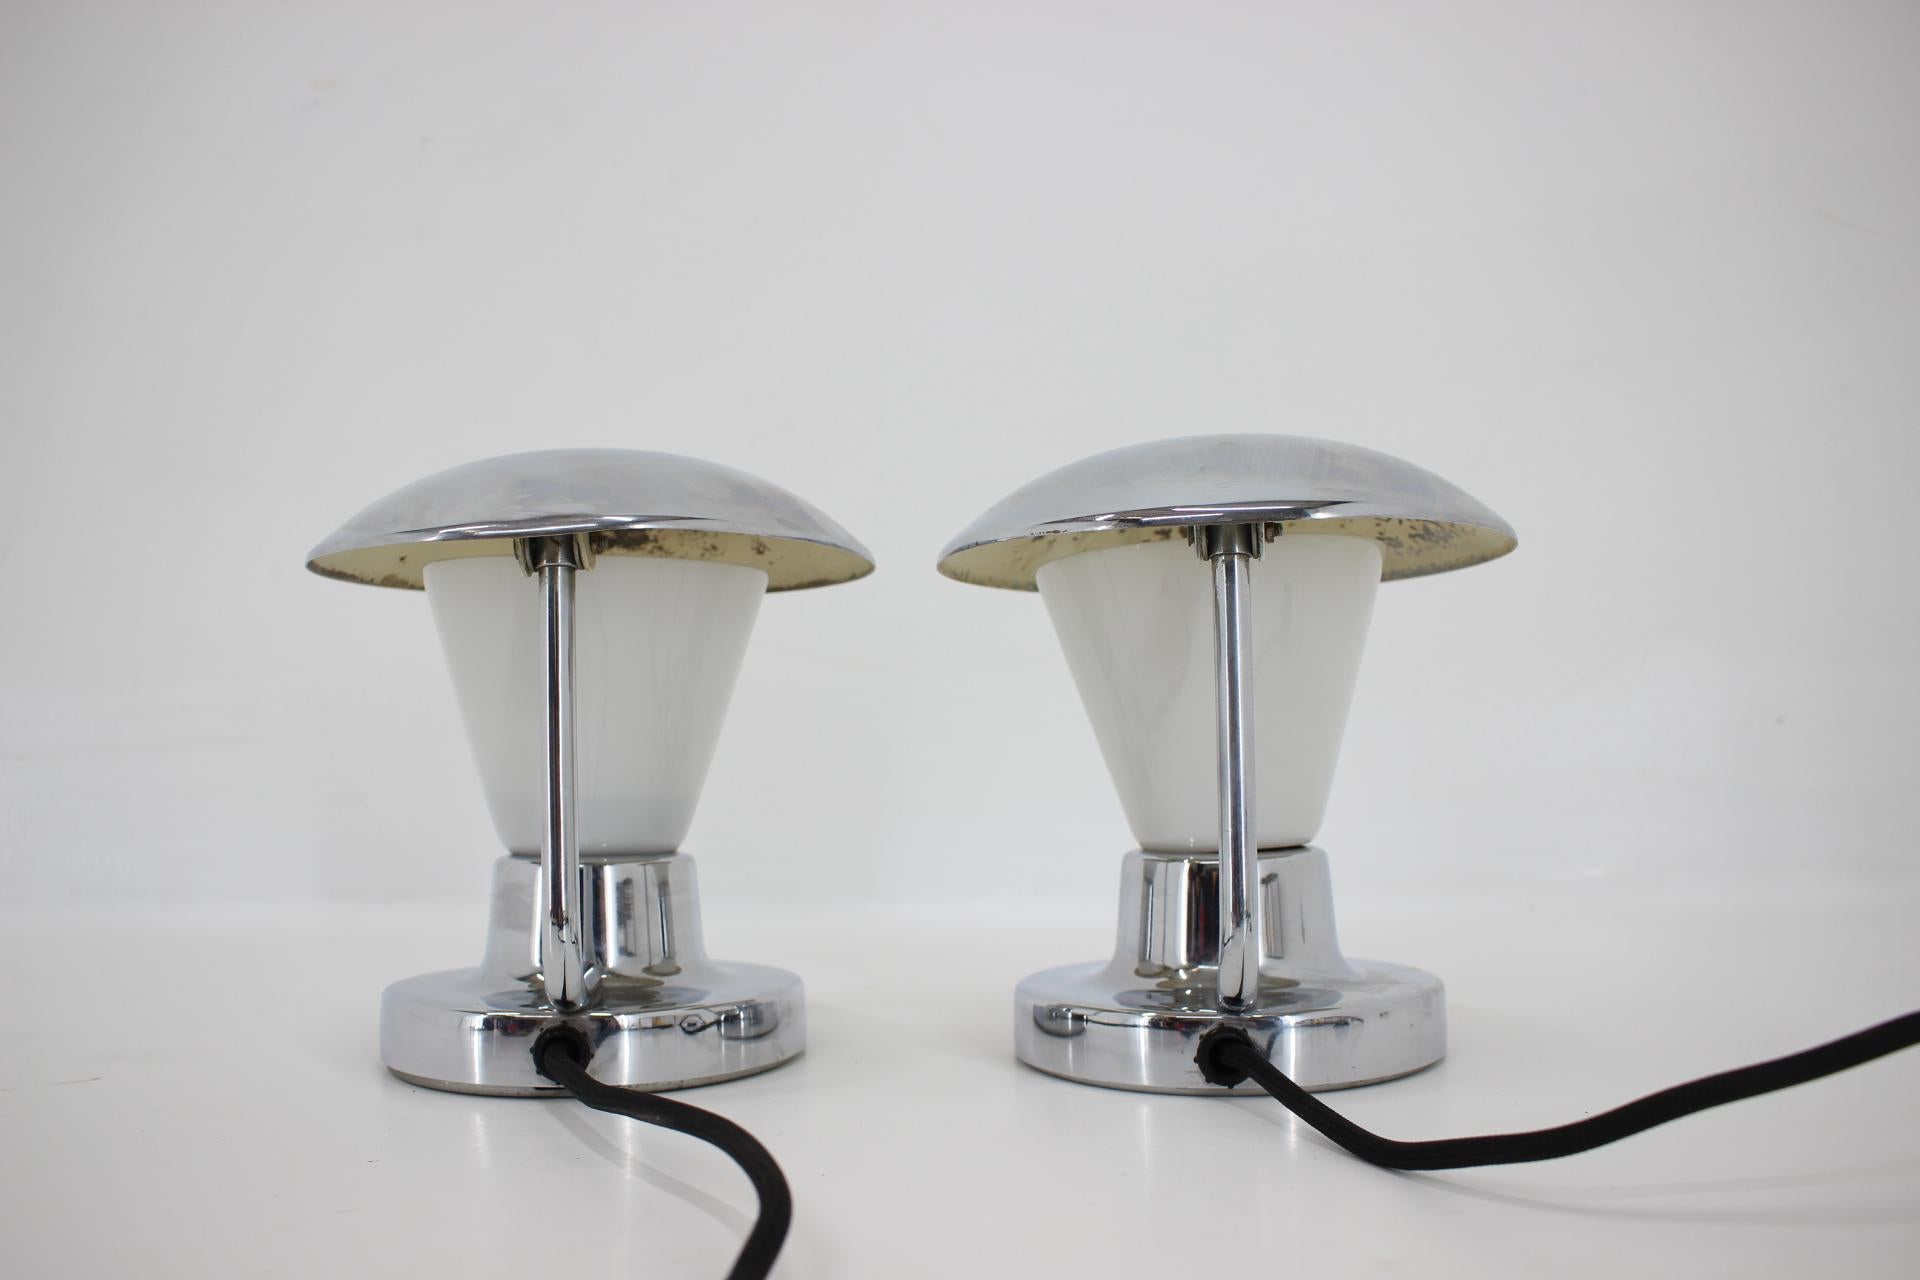 Pair of Chrome Glass Bauhaus Table Lamps, 1930s For Sale 1